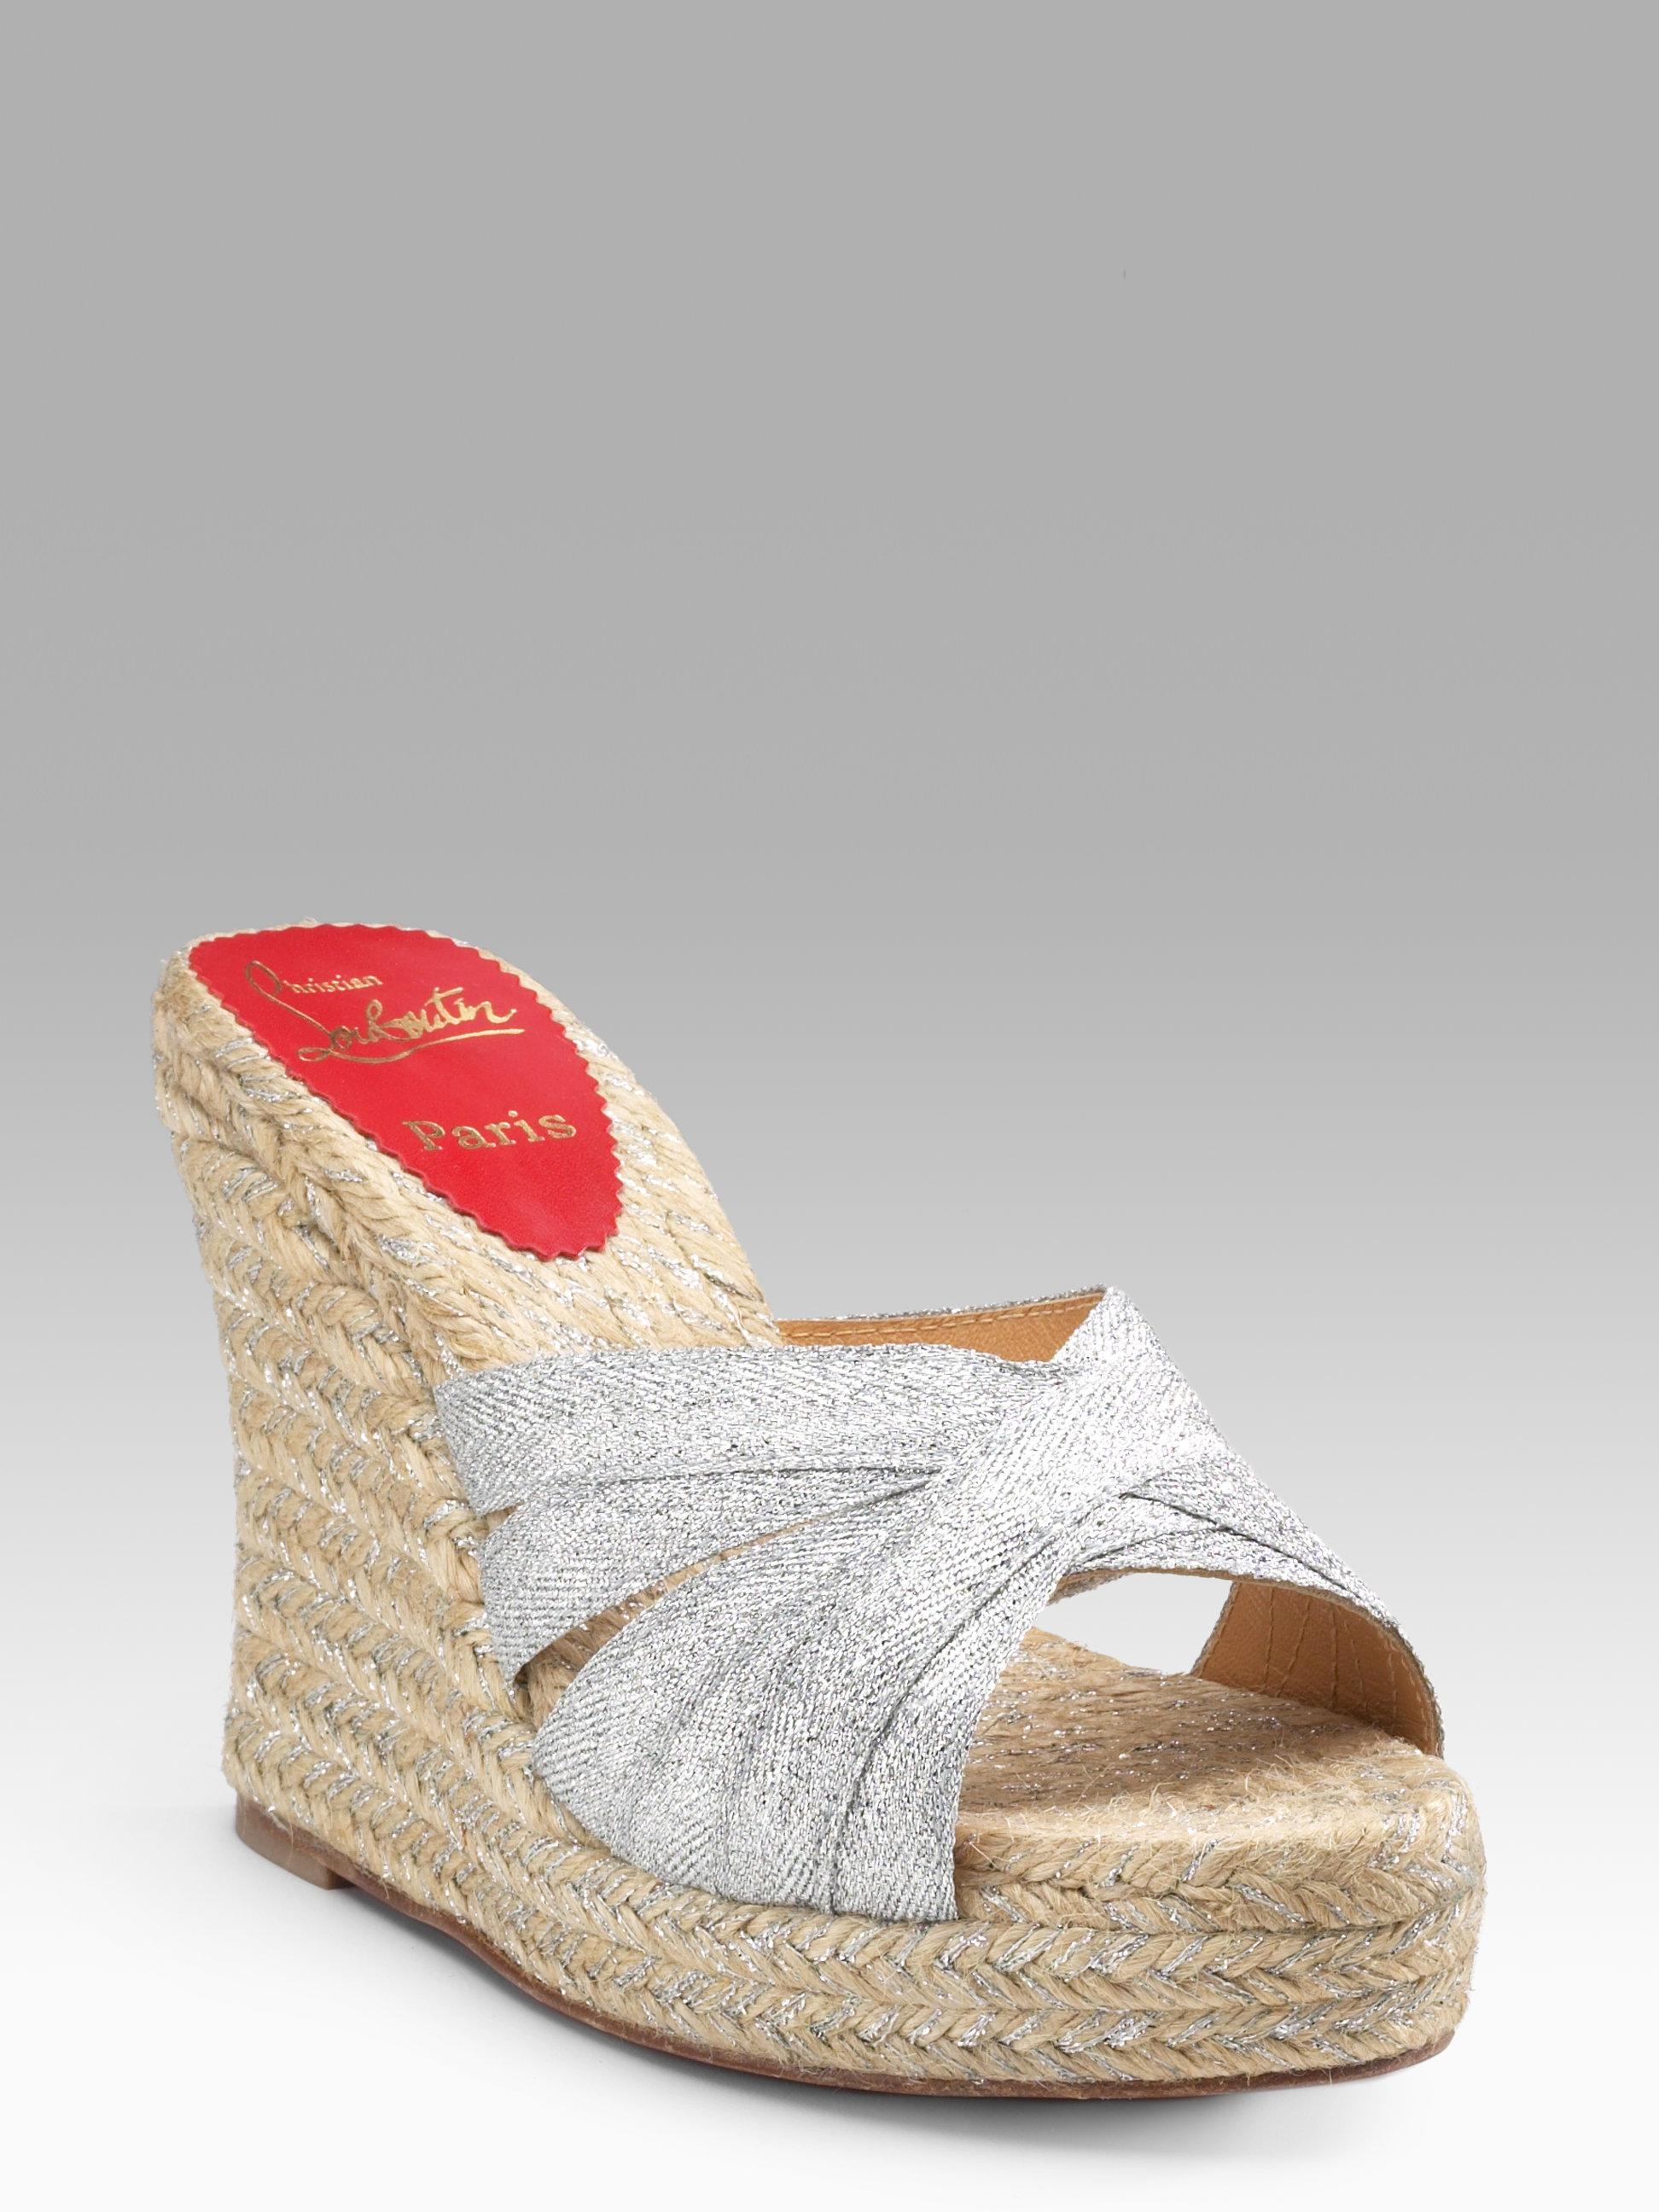 christian louboutin silver wedges